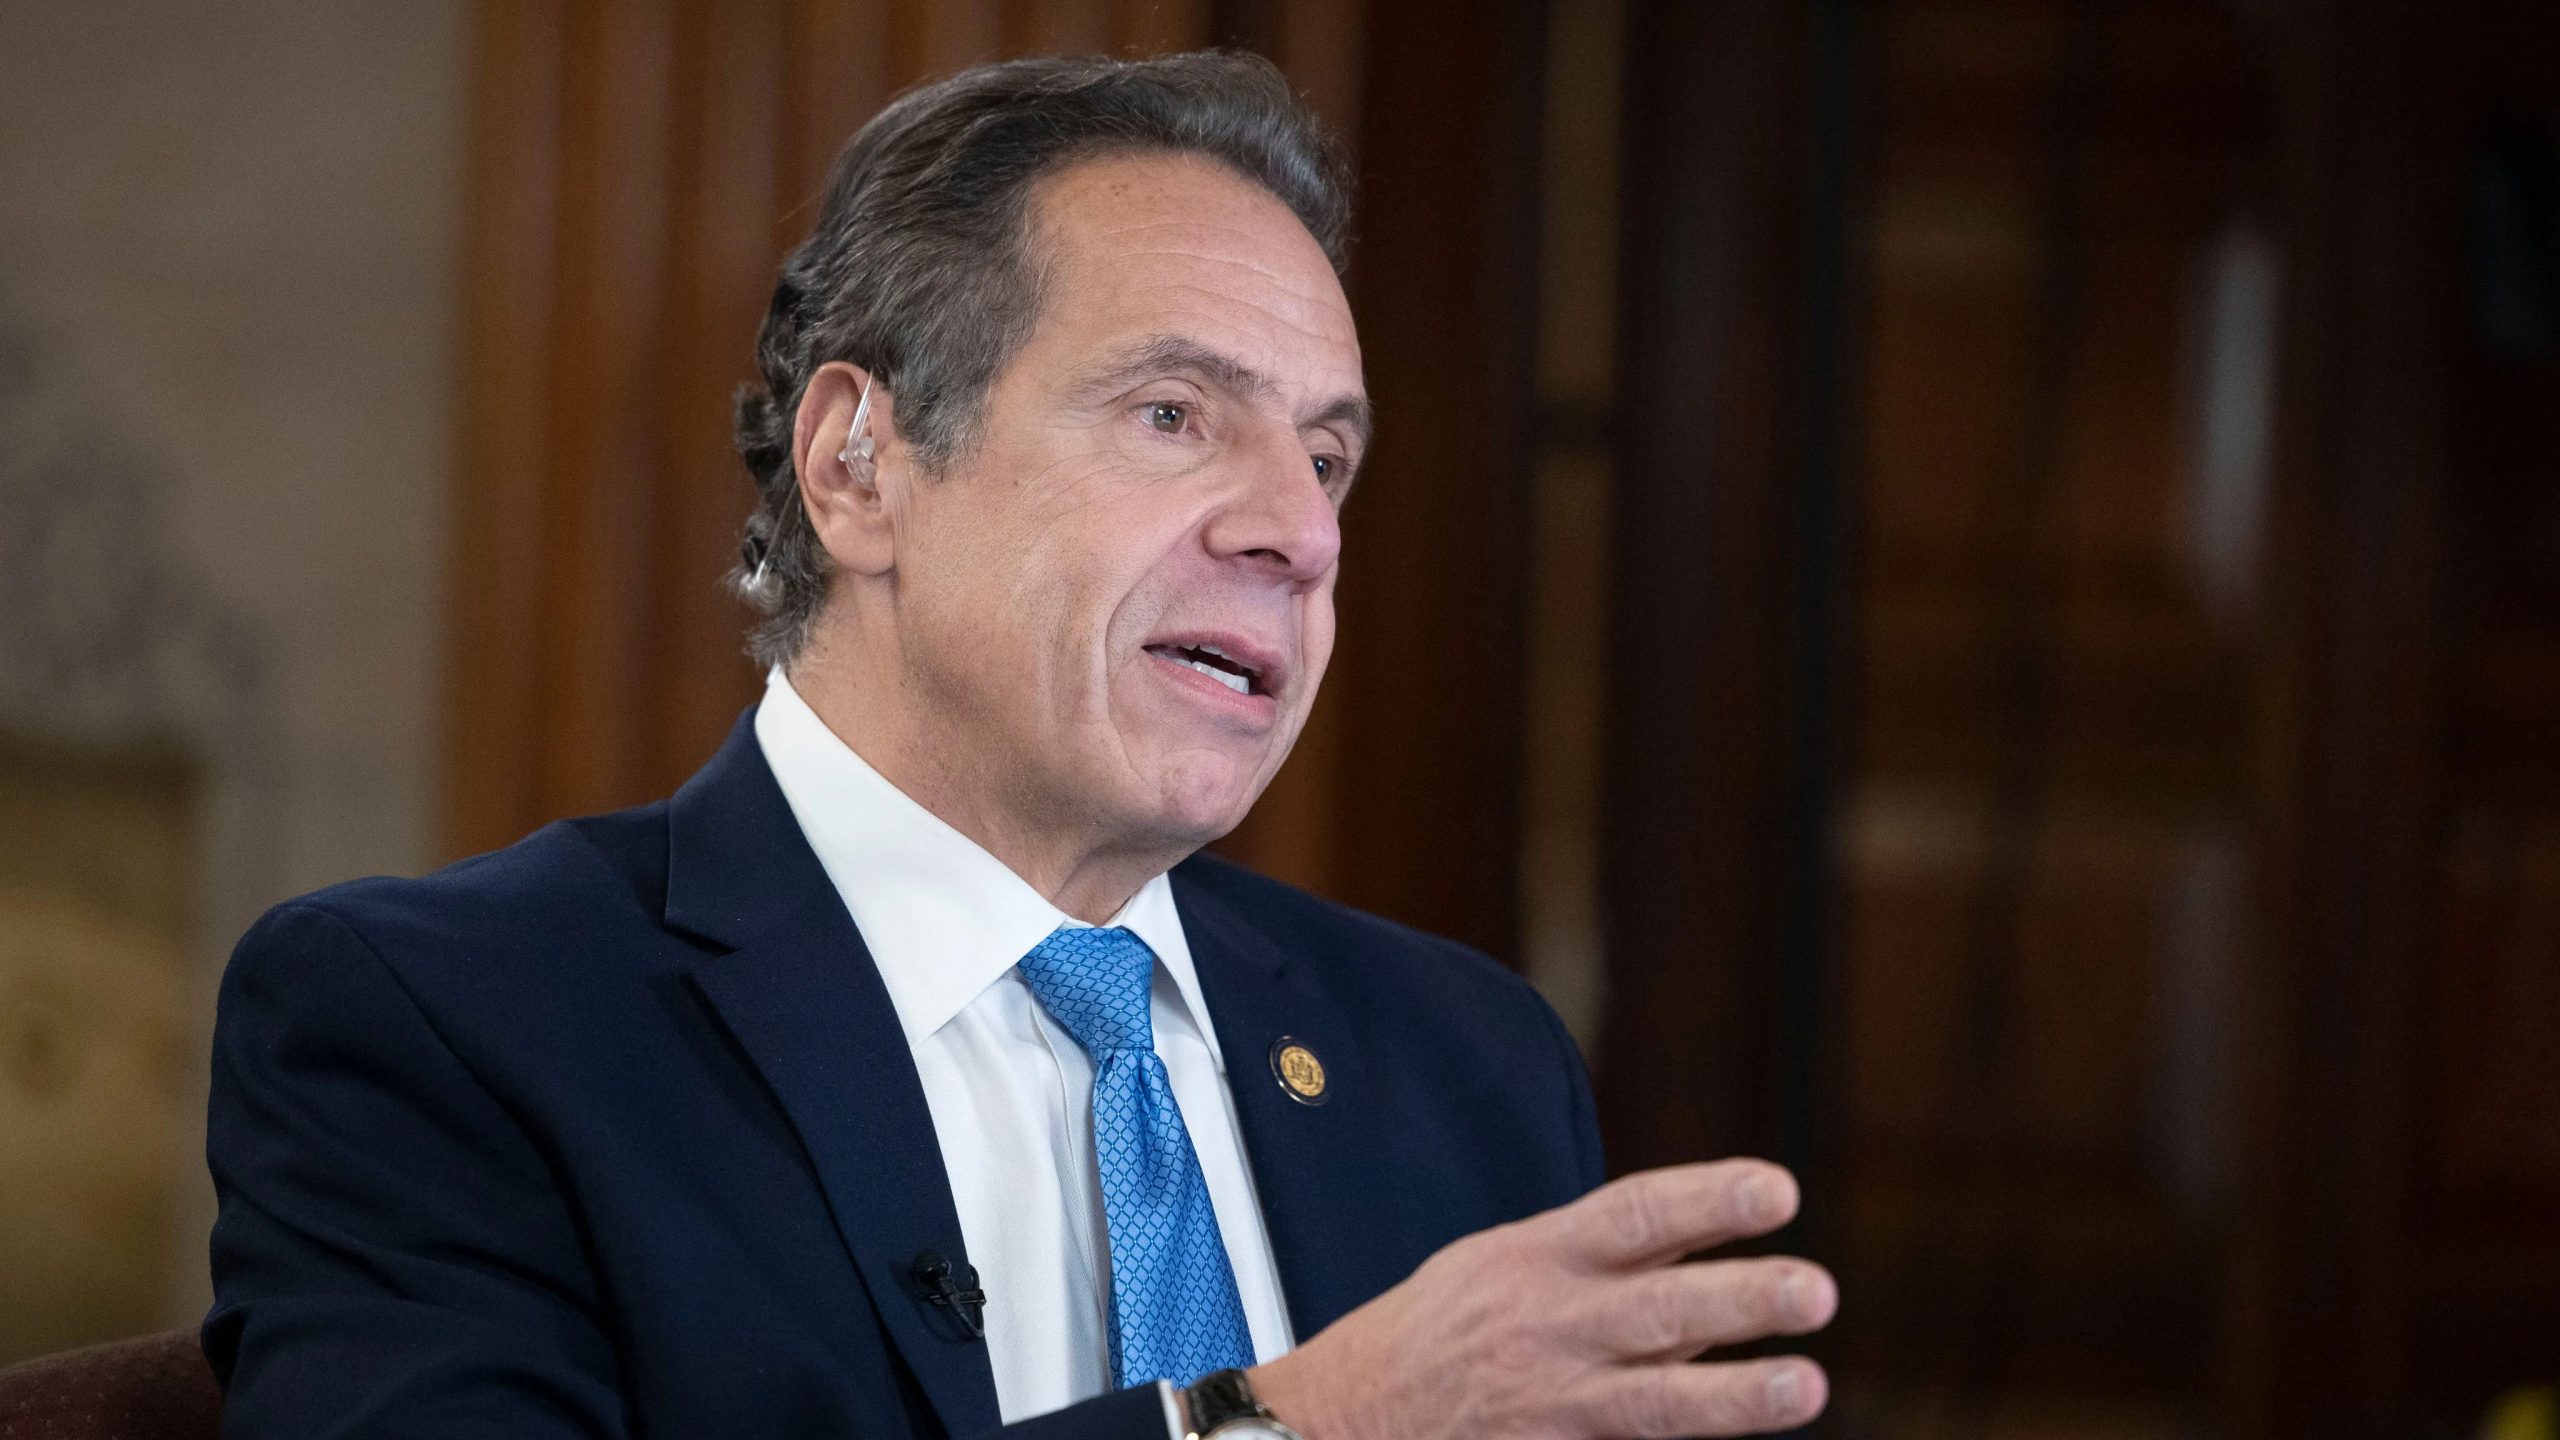 Andrew Cuomo sued by New York state trooper, saying he sexually harassed her